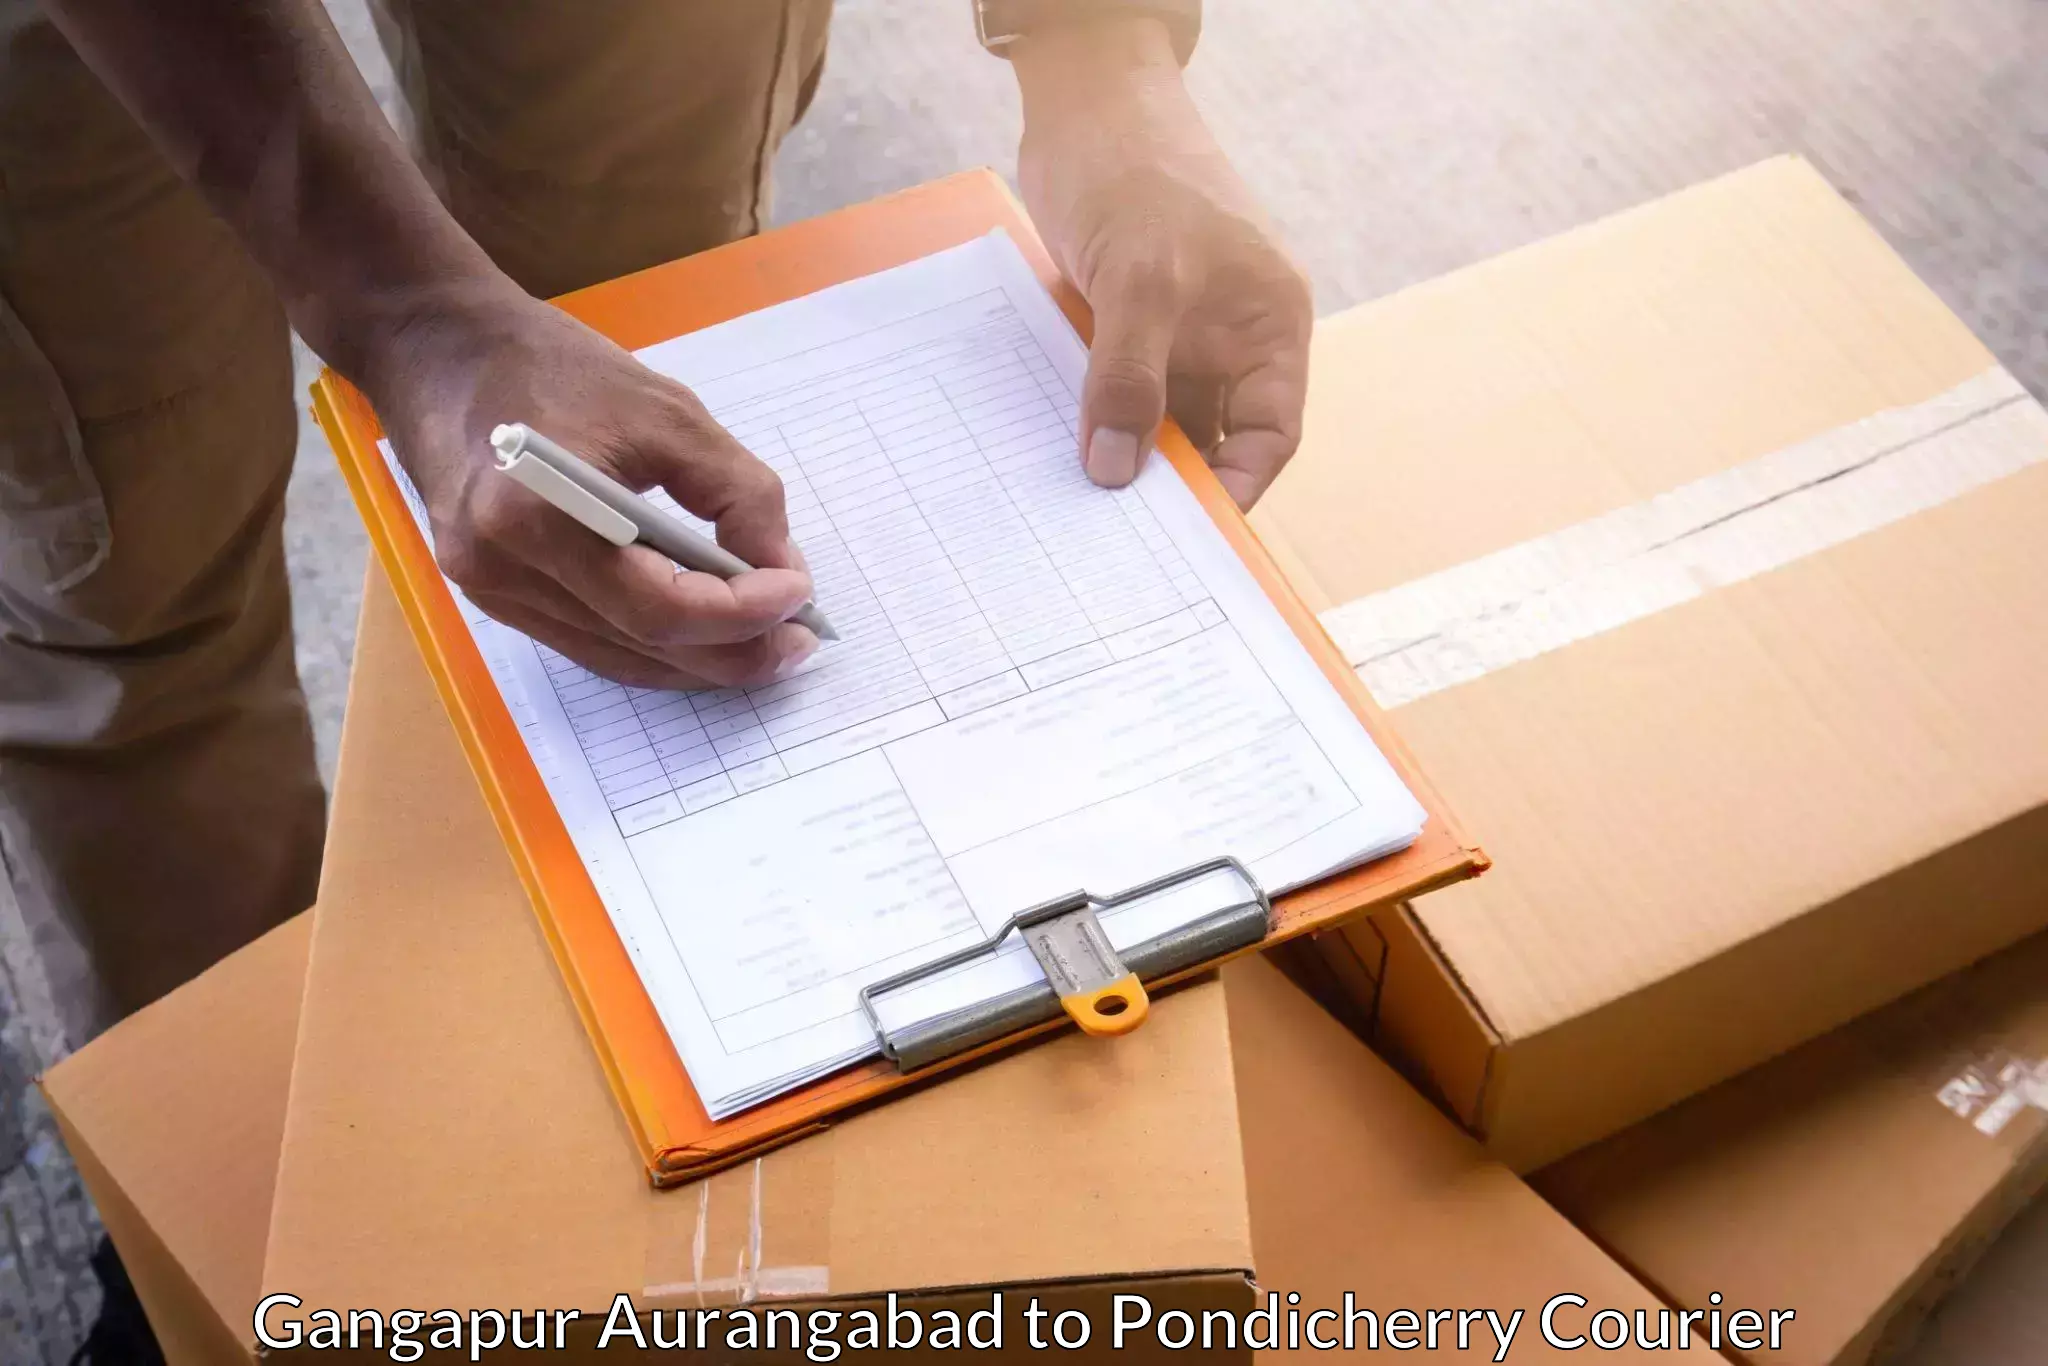 Personal parcel delivery Gangapur Aurangabad to Metttupalayam